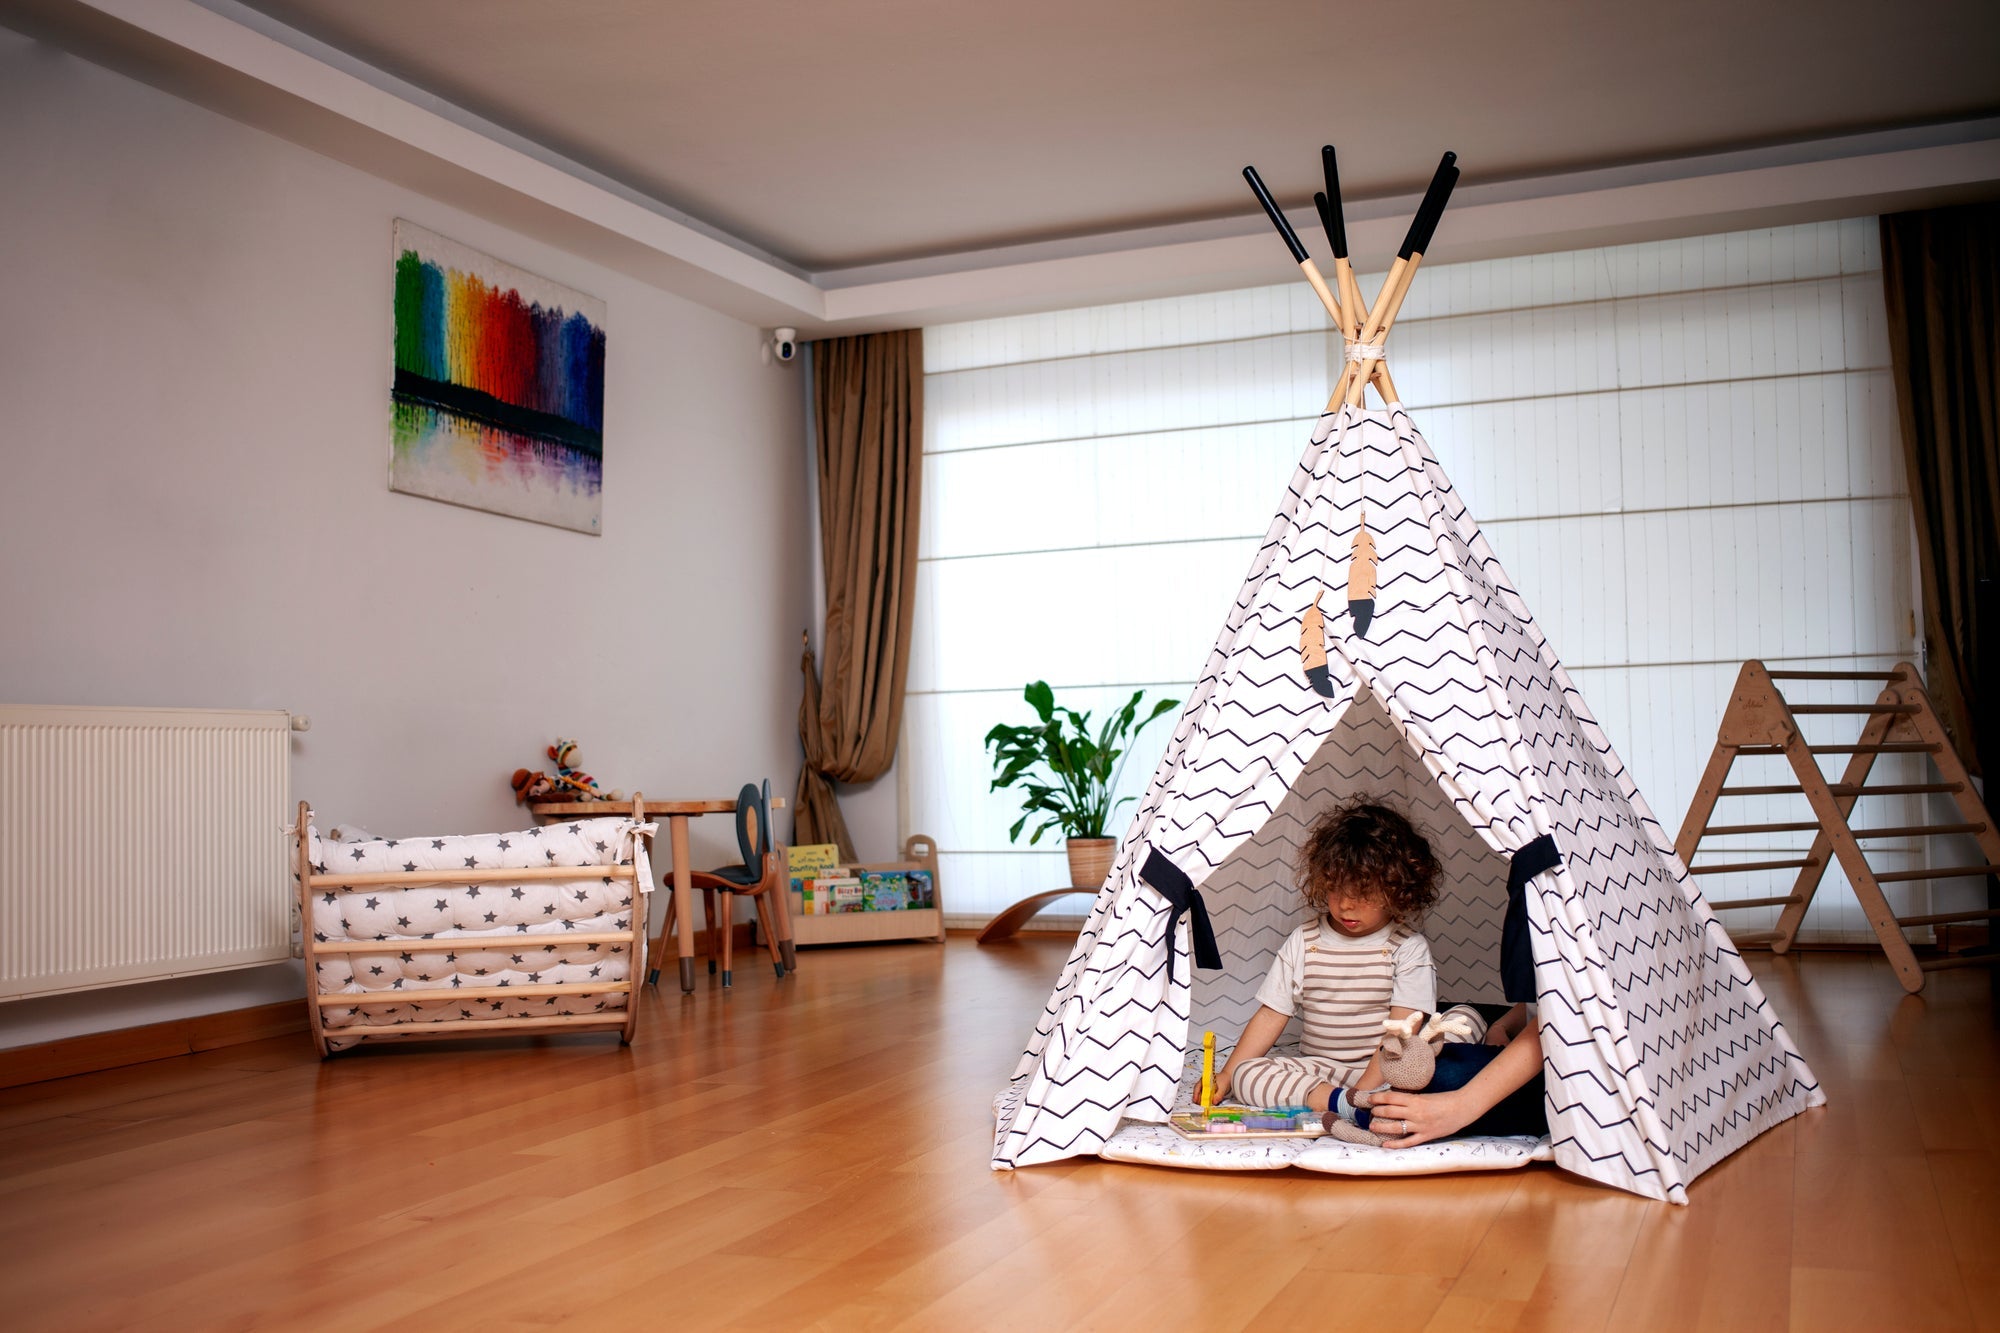 XL Teepee Tent and Play Mat Set